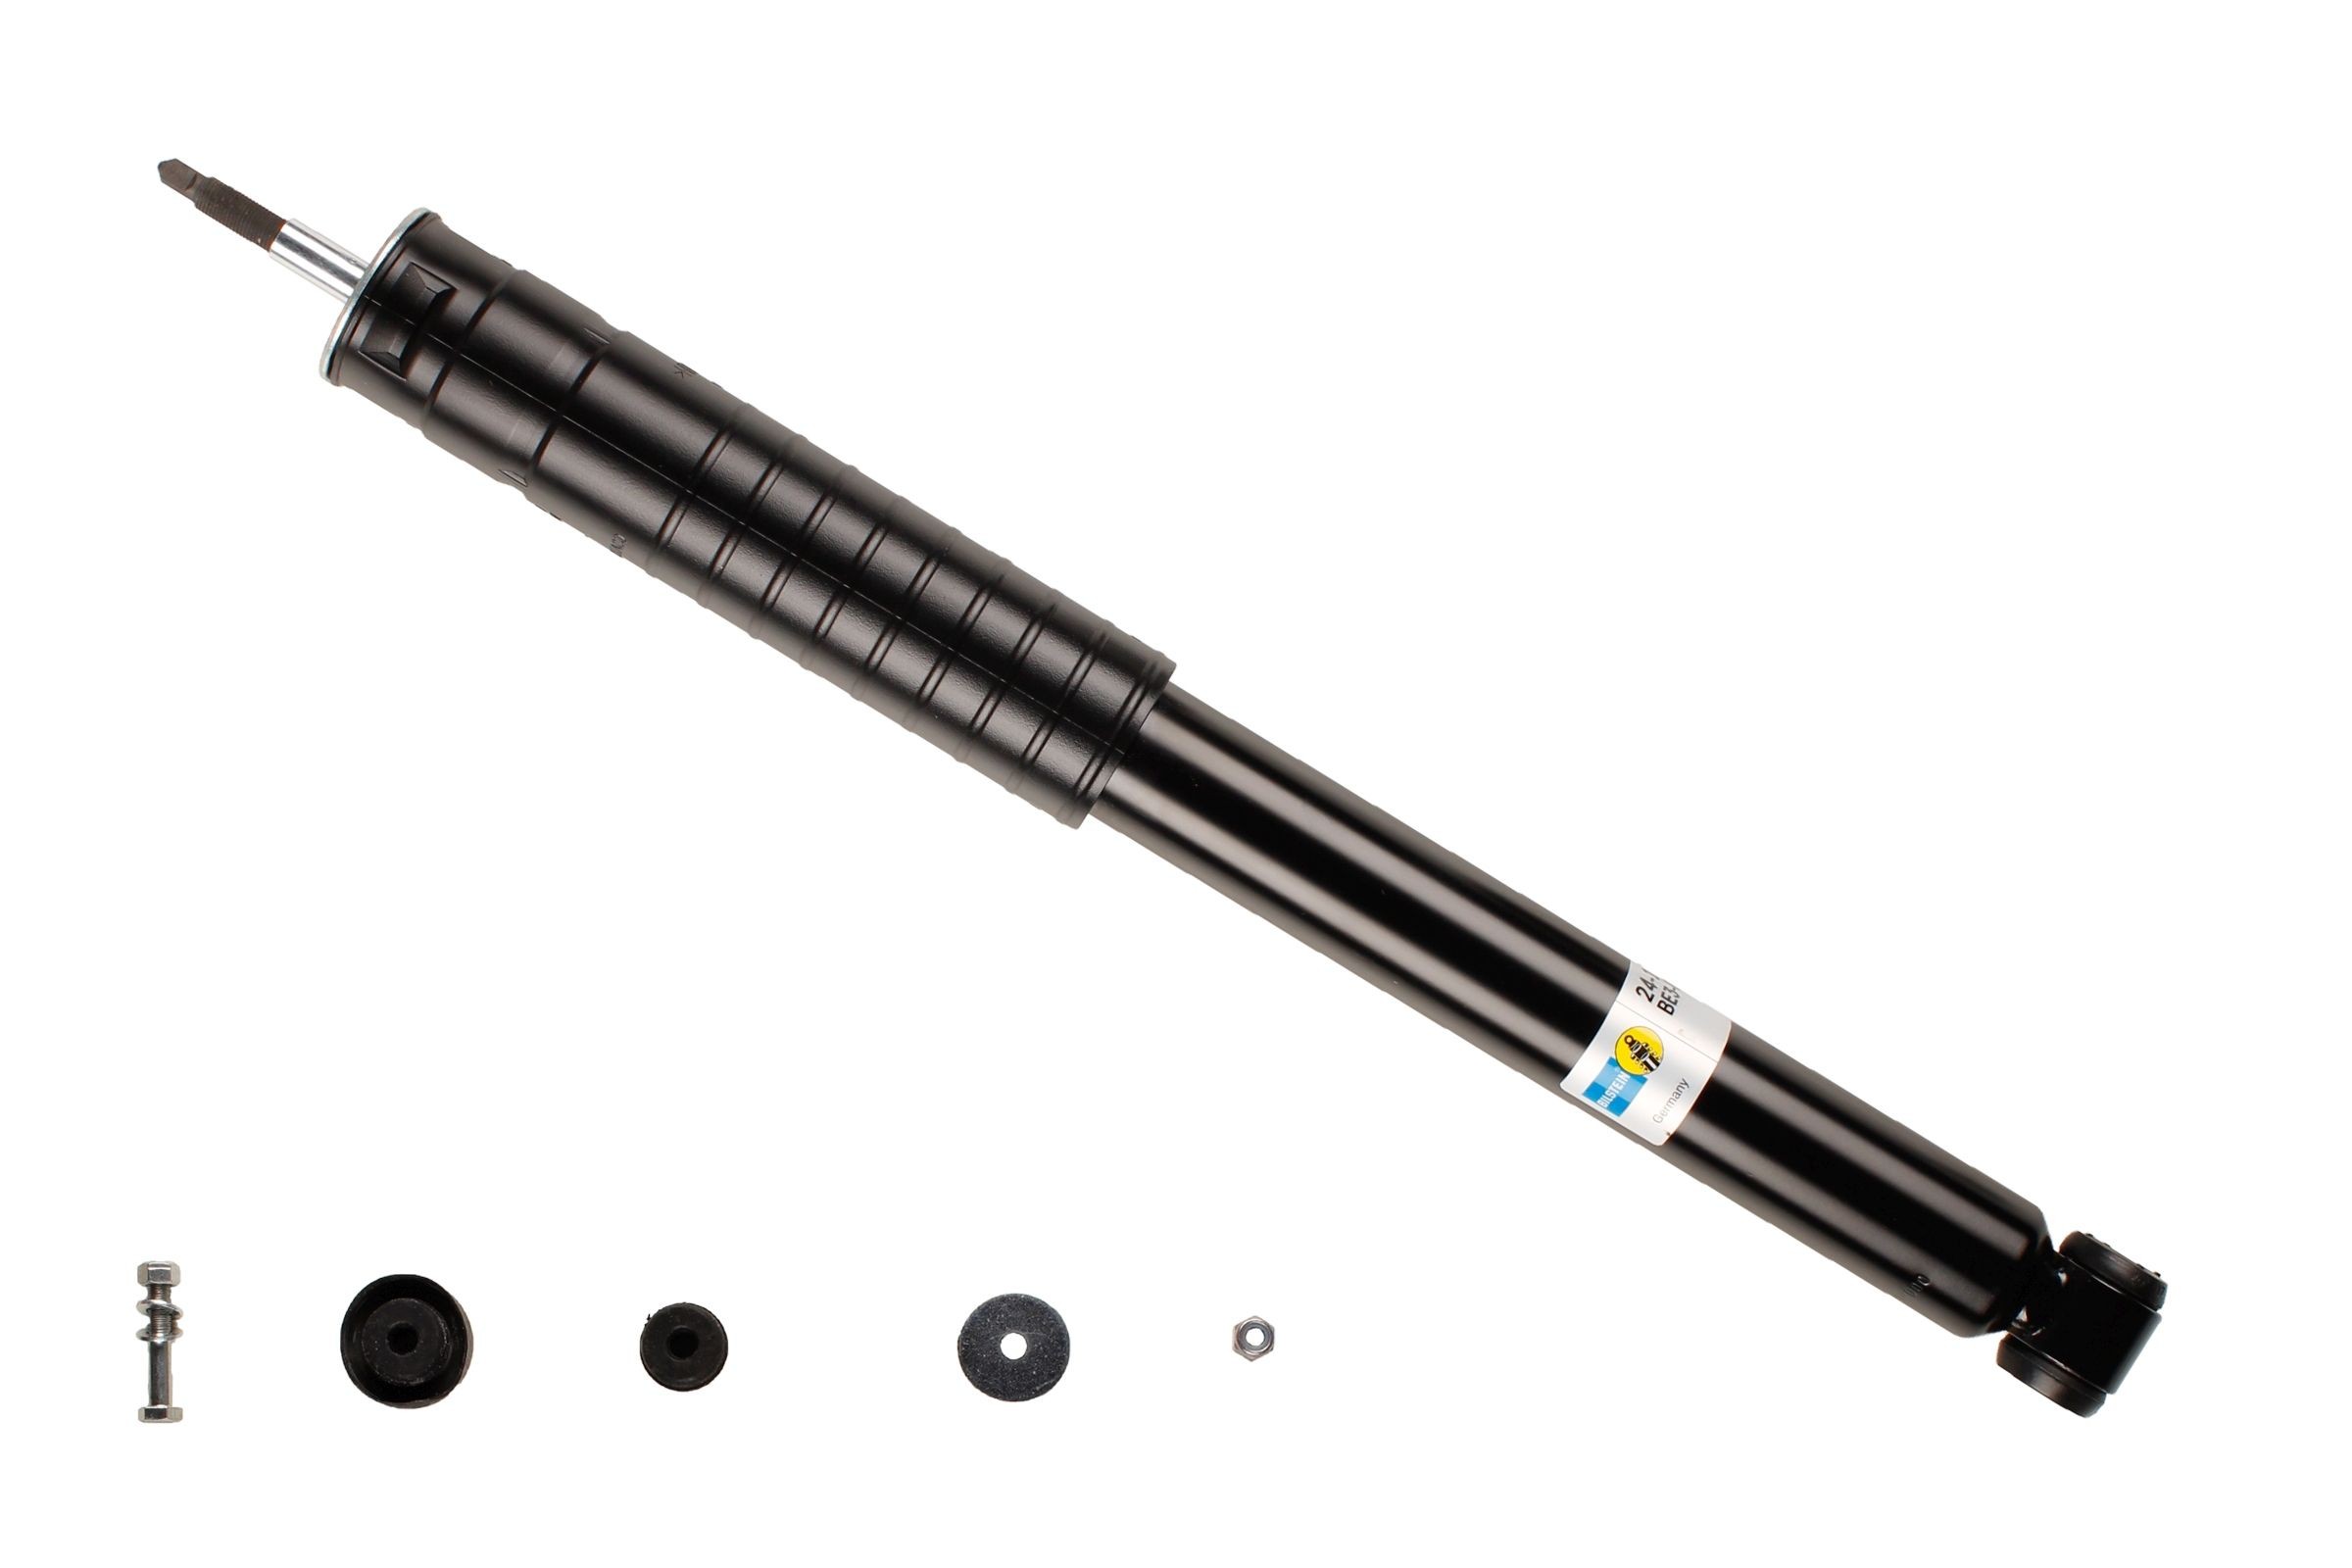 BE3-B021 BILSTEIN - B4 OE Replacement (DampMatic®) Rear Axle, Gas Pressure, Monotube, Absorber does not carry a spring, Bottom eye, Top pin Shocks 24-110211 buy